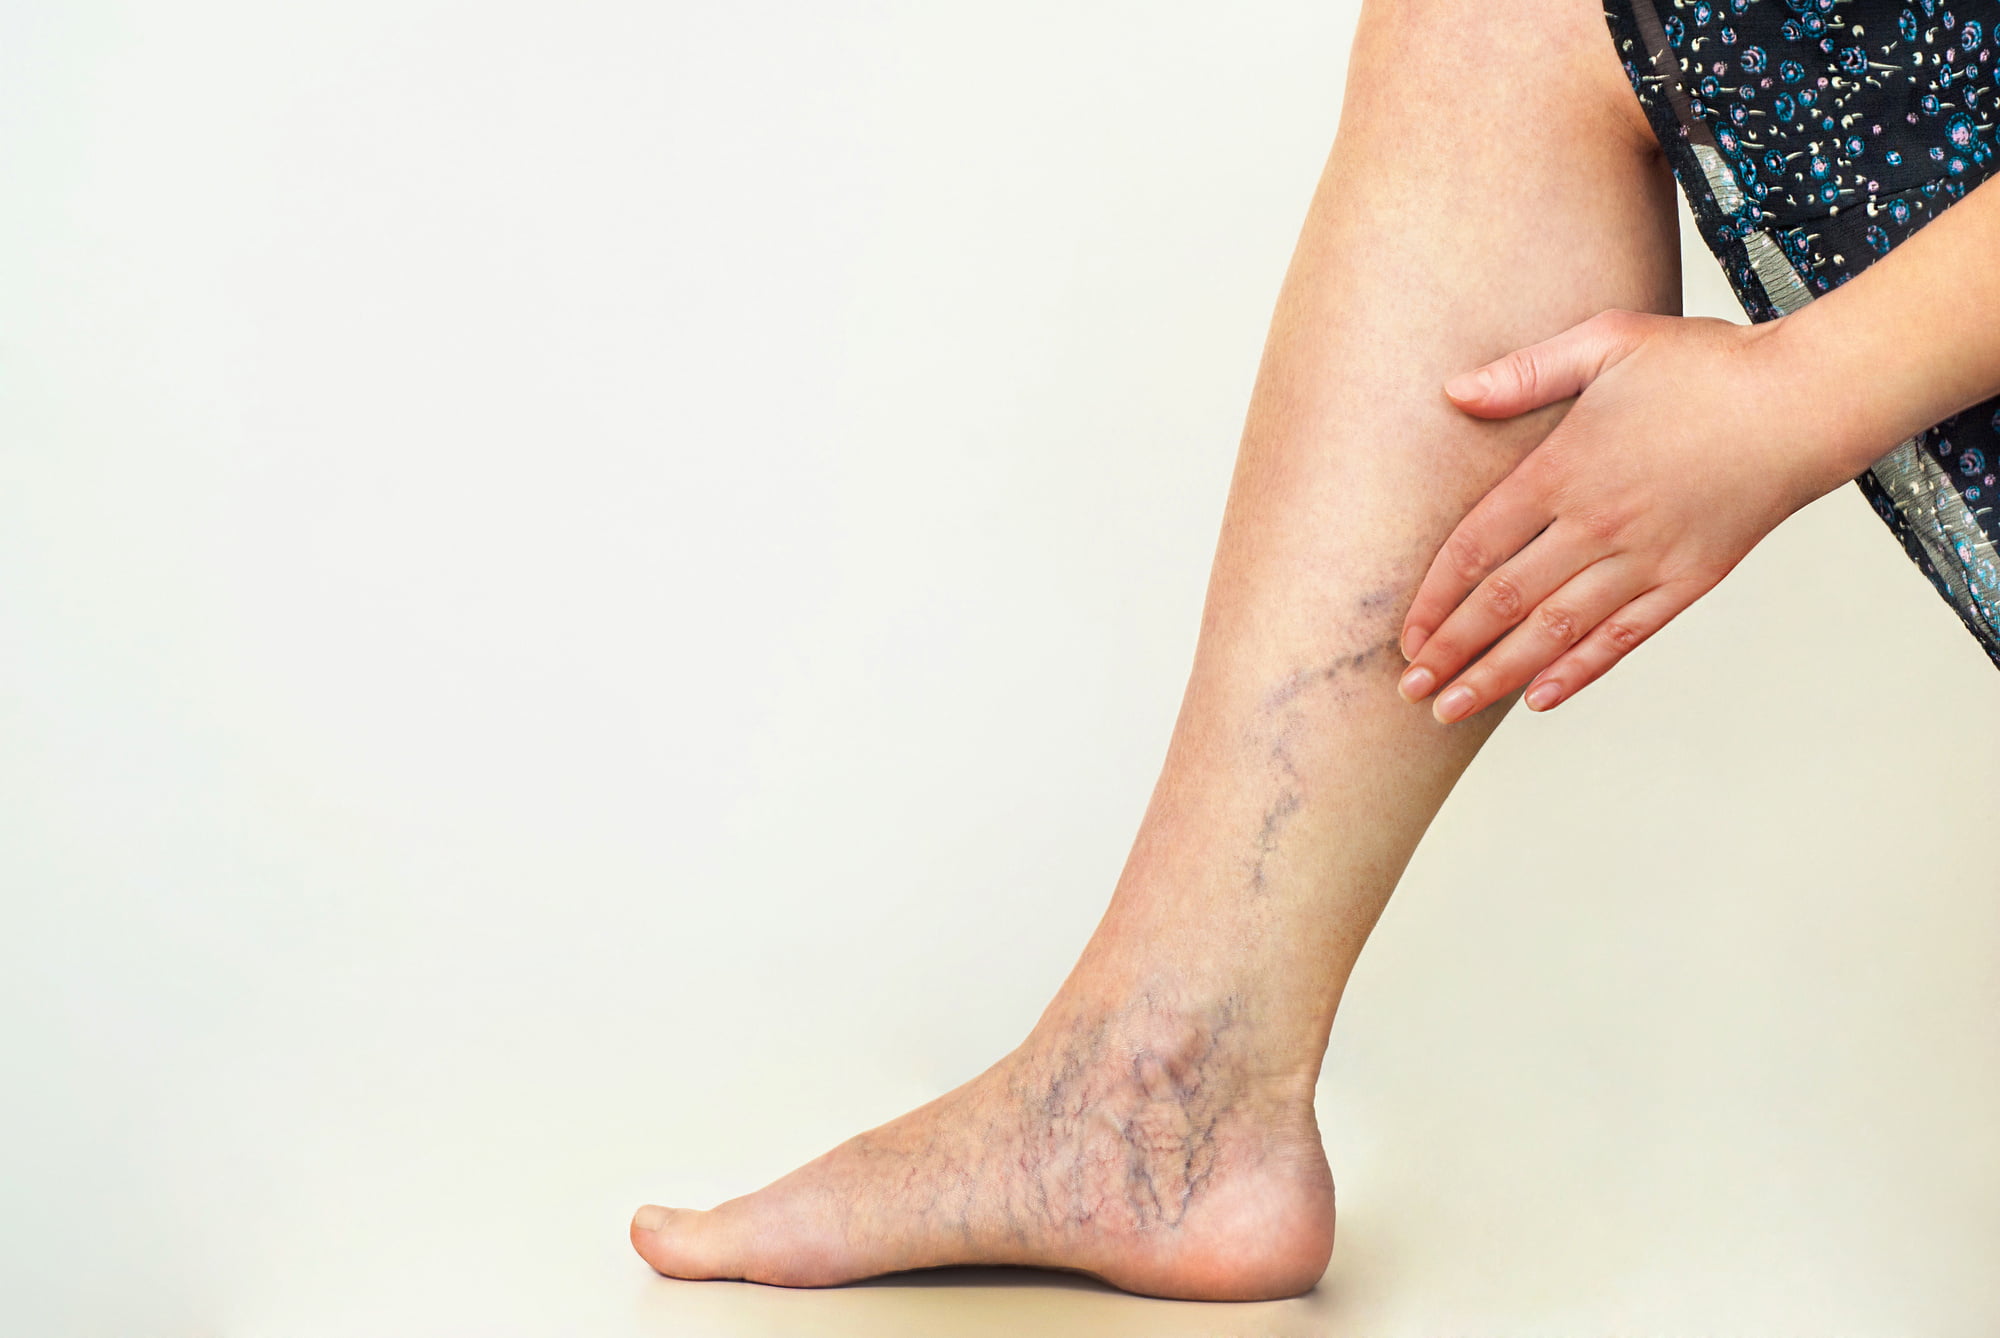 If you're trying to figure out how to get rid of varicose veins, you're in luck! Our guide here explains the different things you can do.